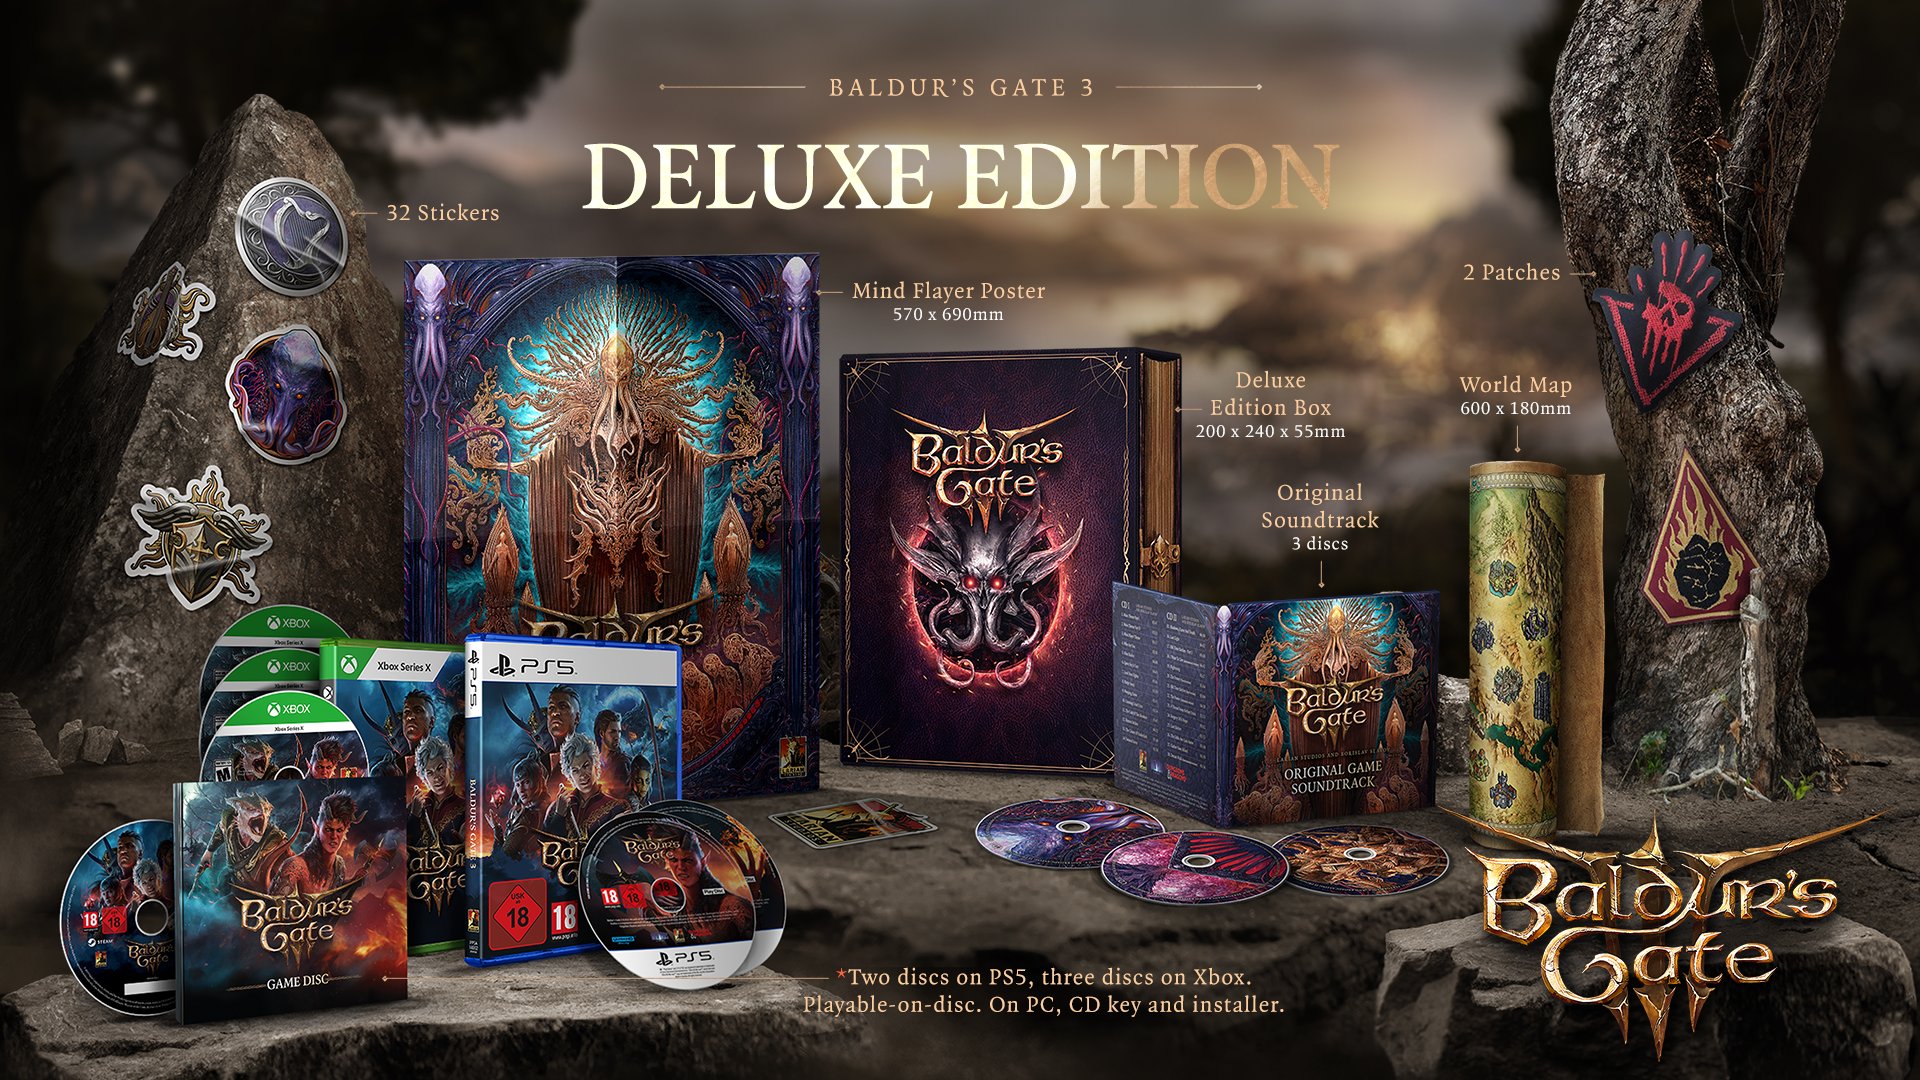 Larian Studios on X: Playable-on-disc? Must be the Baldur's Gate 3 -  Deluxe Edition. Preorder:  The Deluxe Edition for PS5,  Xbox, and PC includes the Digital Deluxe edition, as well as